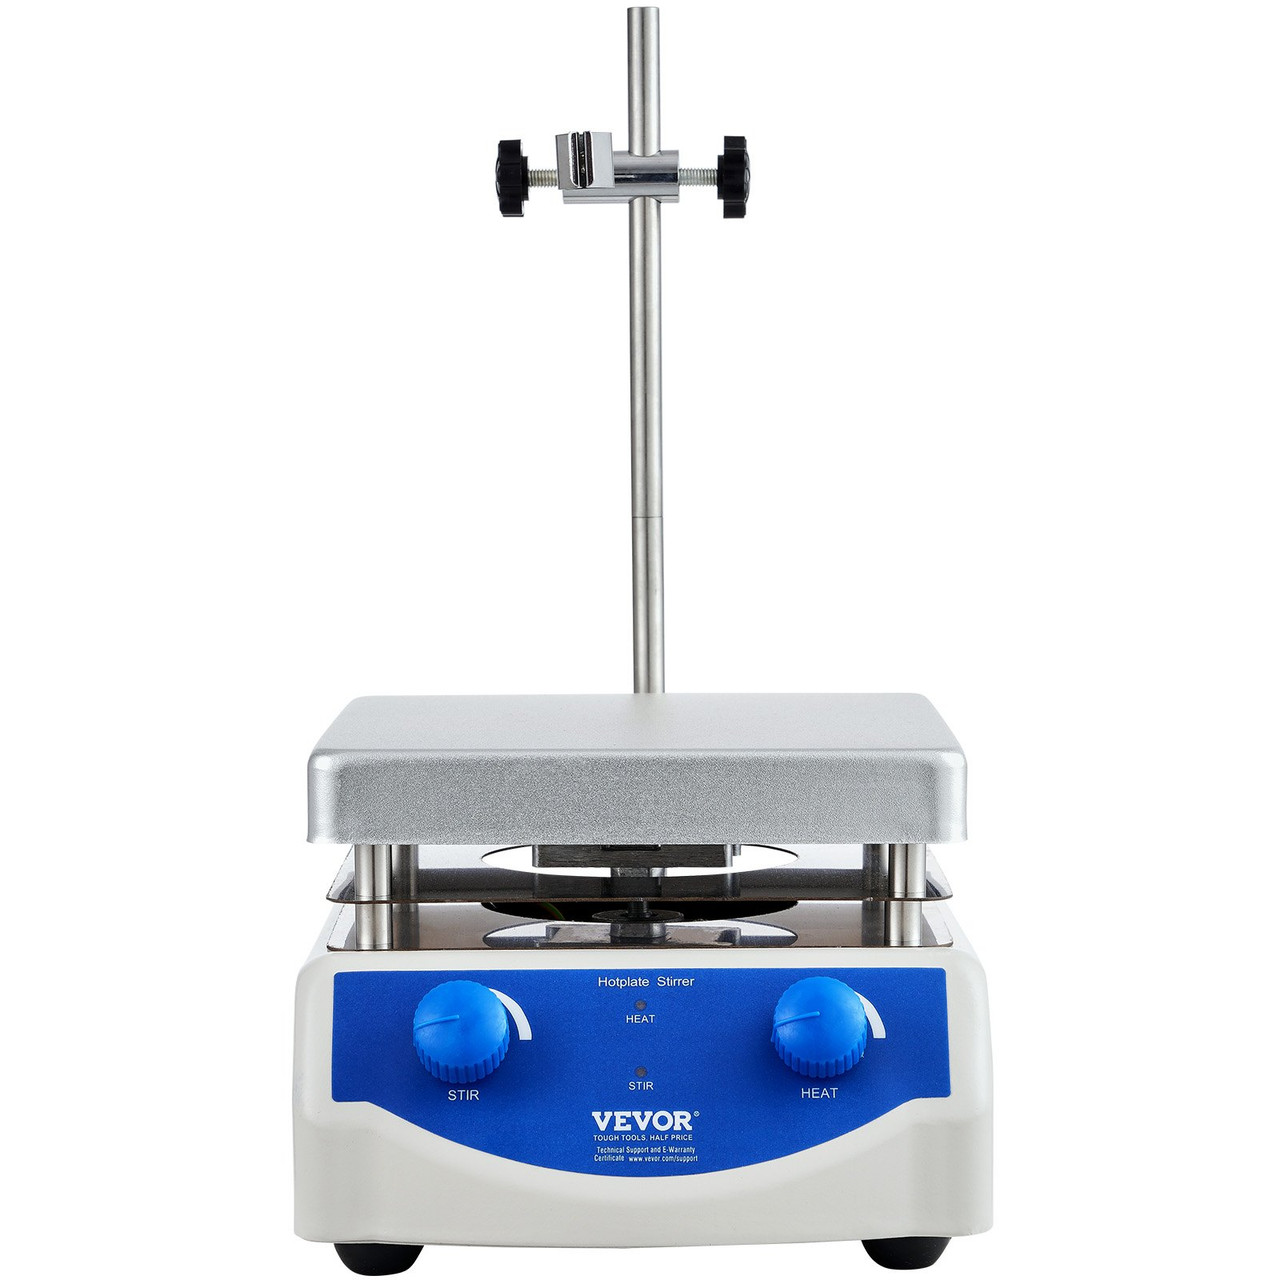 VEVOR Magnetic Stirrer Hot Plate, Max 716°F/380°C, 0-2000 RPM Hot Plate with Magnetic Stirrer, 3000mL Hot Plate Stirrer, Support Stand and Stir Bars Included, 500W Heating Power